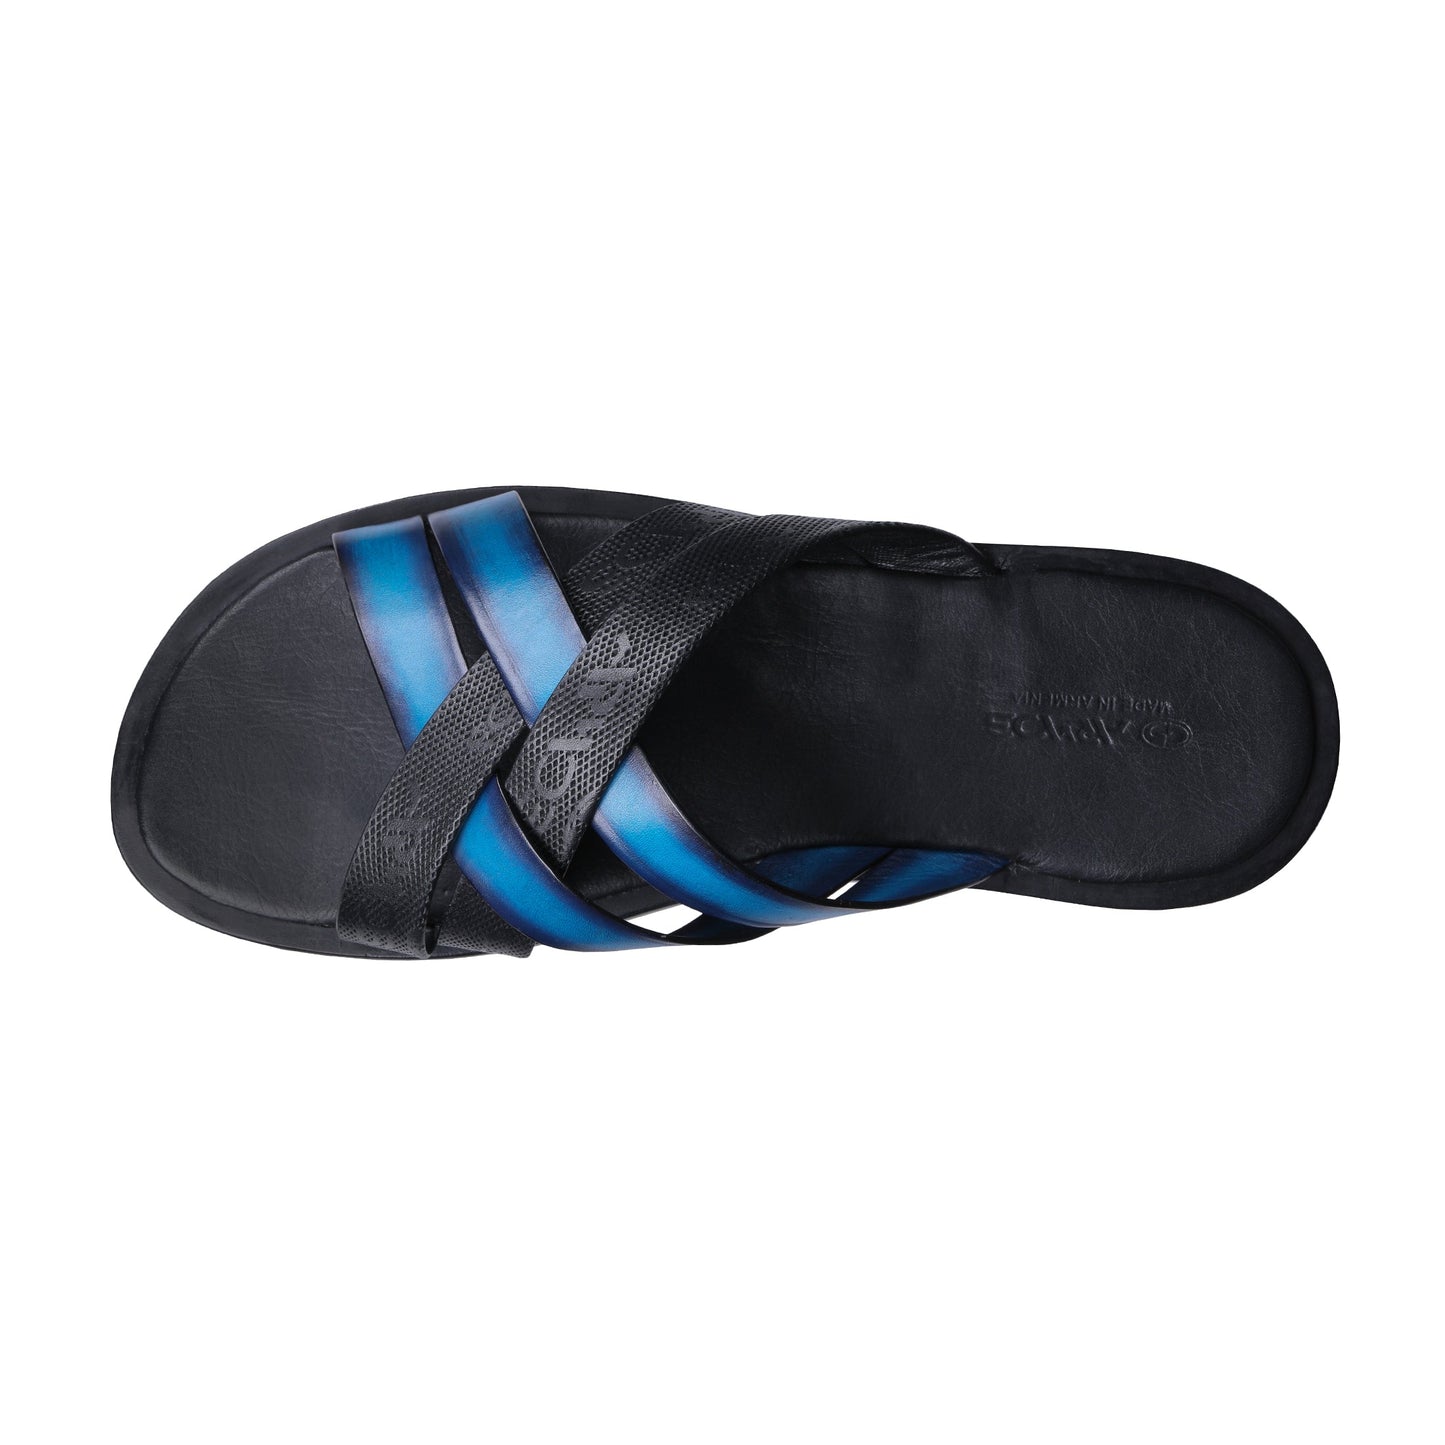 Slippers in black and blue